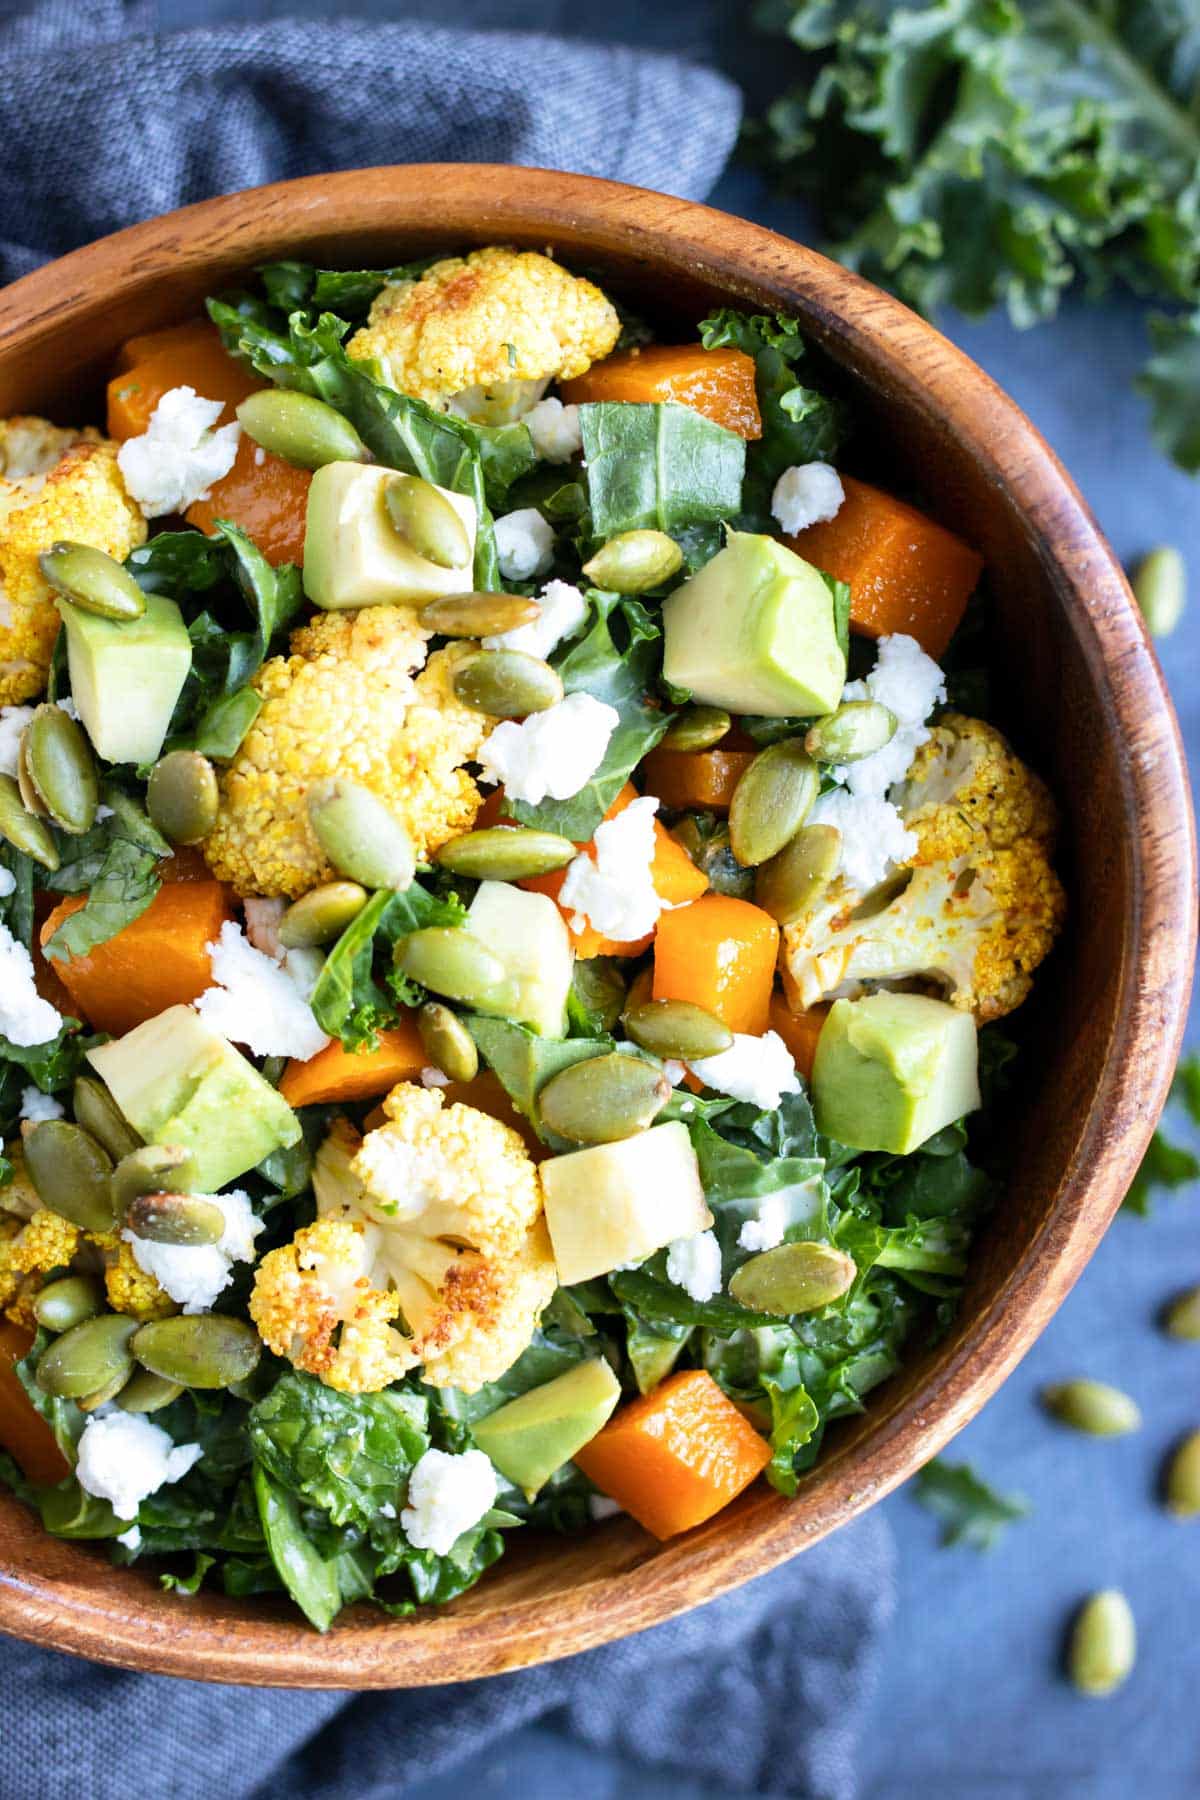 A roasted vegetable salad recipe with kale and cauliflower.